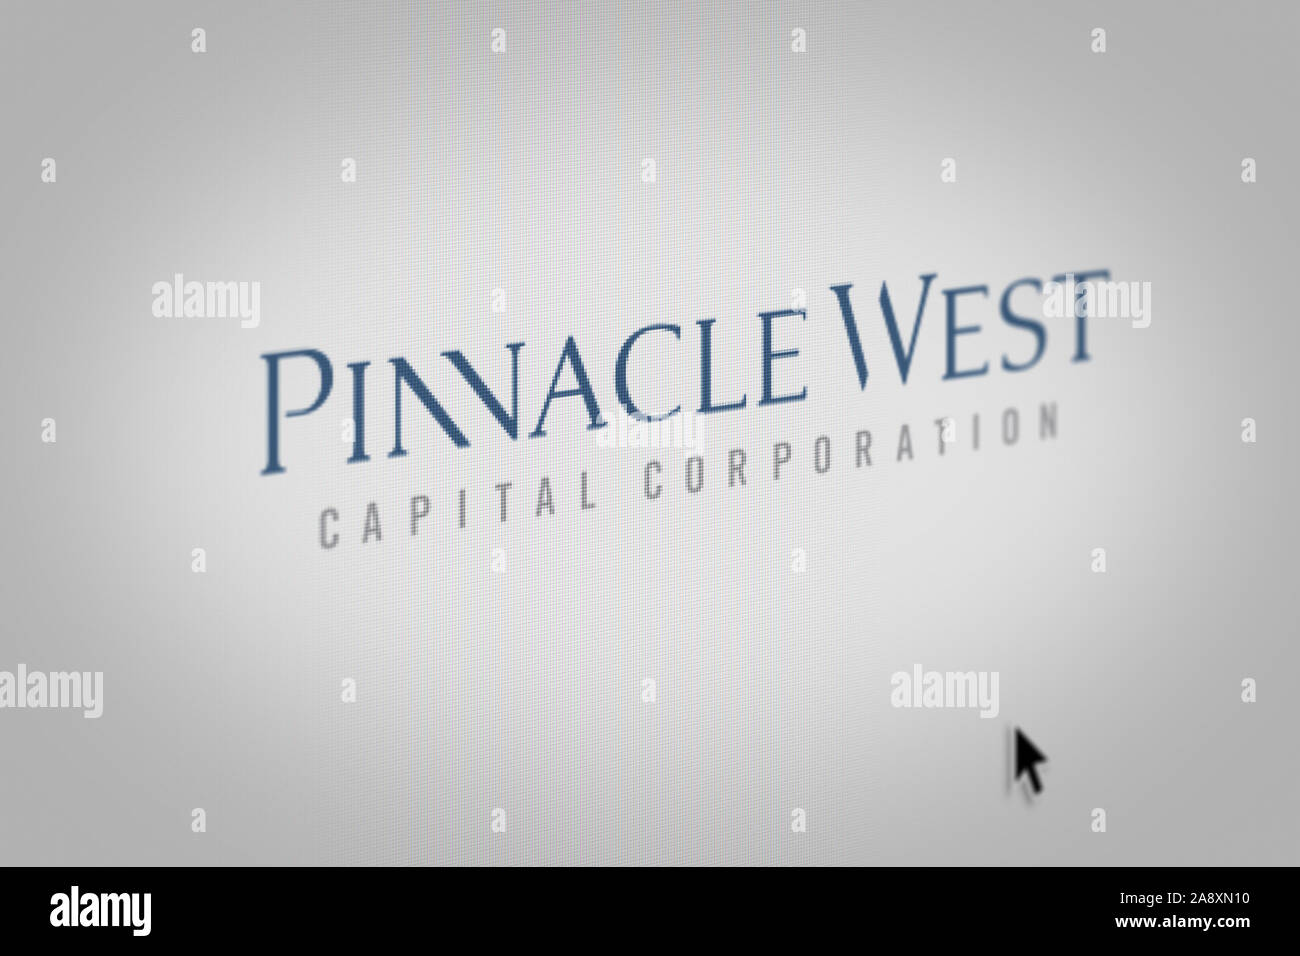 Logo of the public company Pinnacle West Capital displayed on a computer  screen in close-up. Credit: PIXDUCE Stock Photo - Alamy